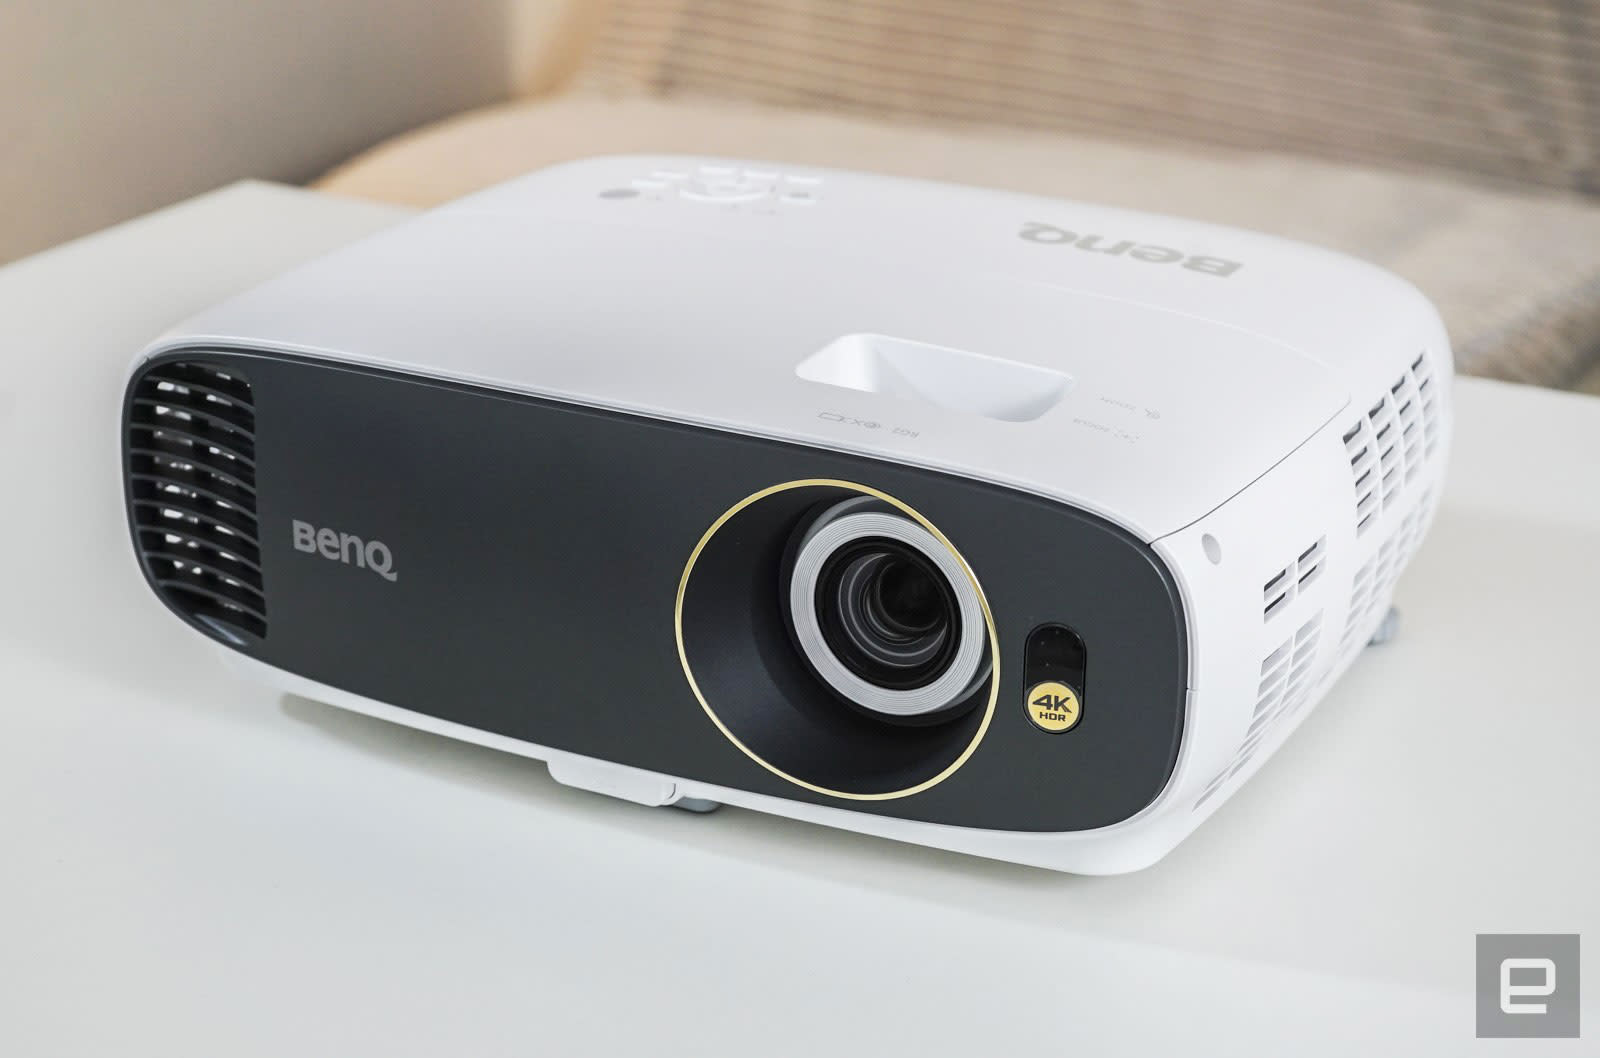 BenQ's HT2550 is a well-priced 4K projector with some minor issues